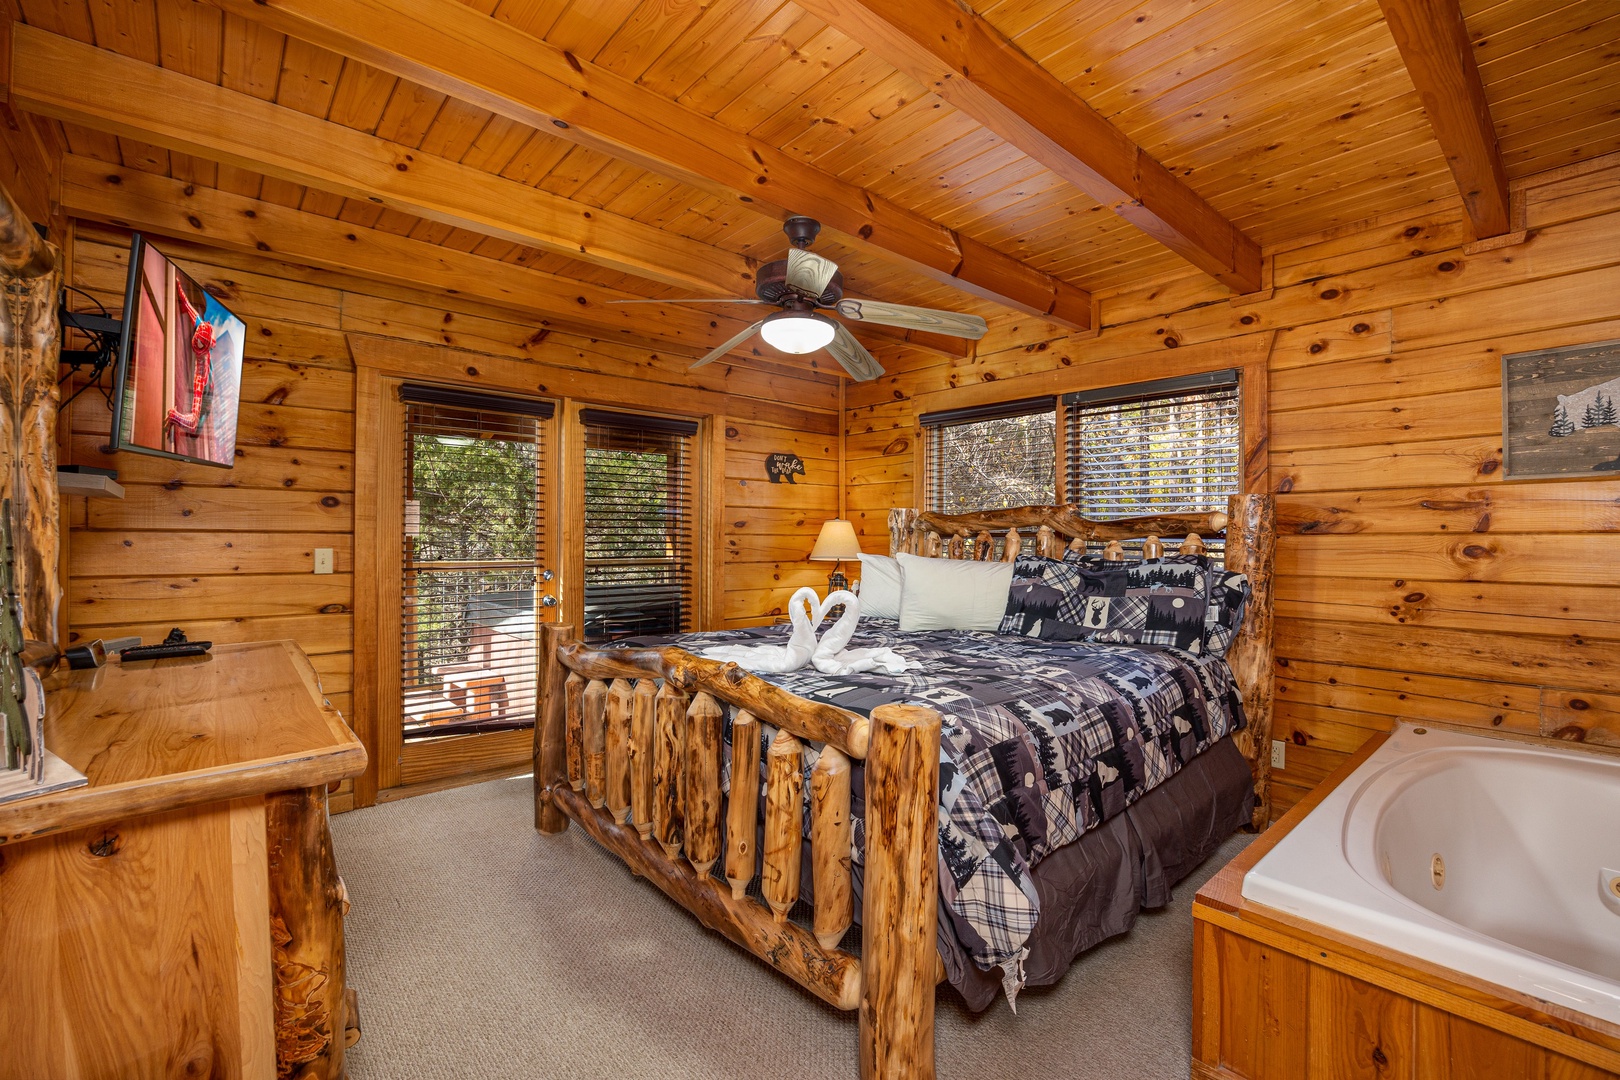 Log king bed and in room jacuzzi at Bear Feet Retreat, a 1 bedroom cabin rental located in pigeon forge